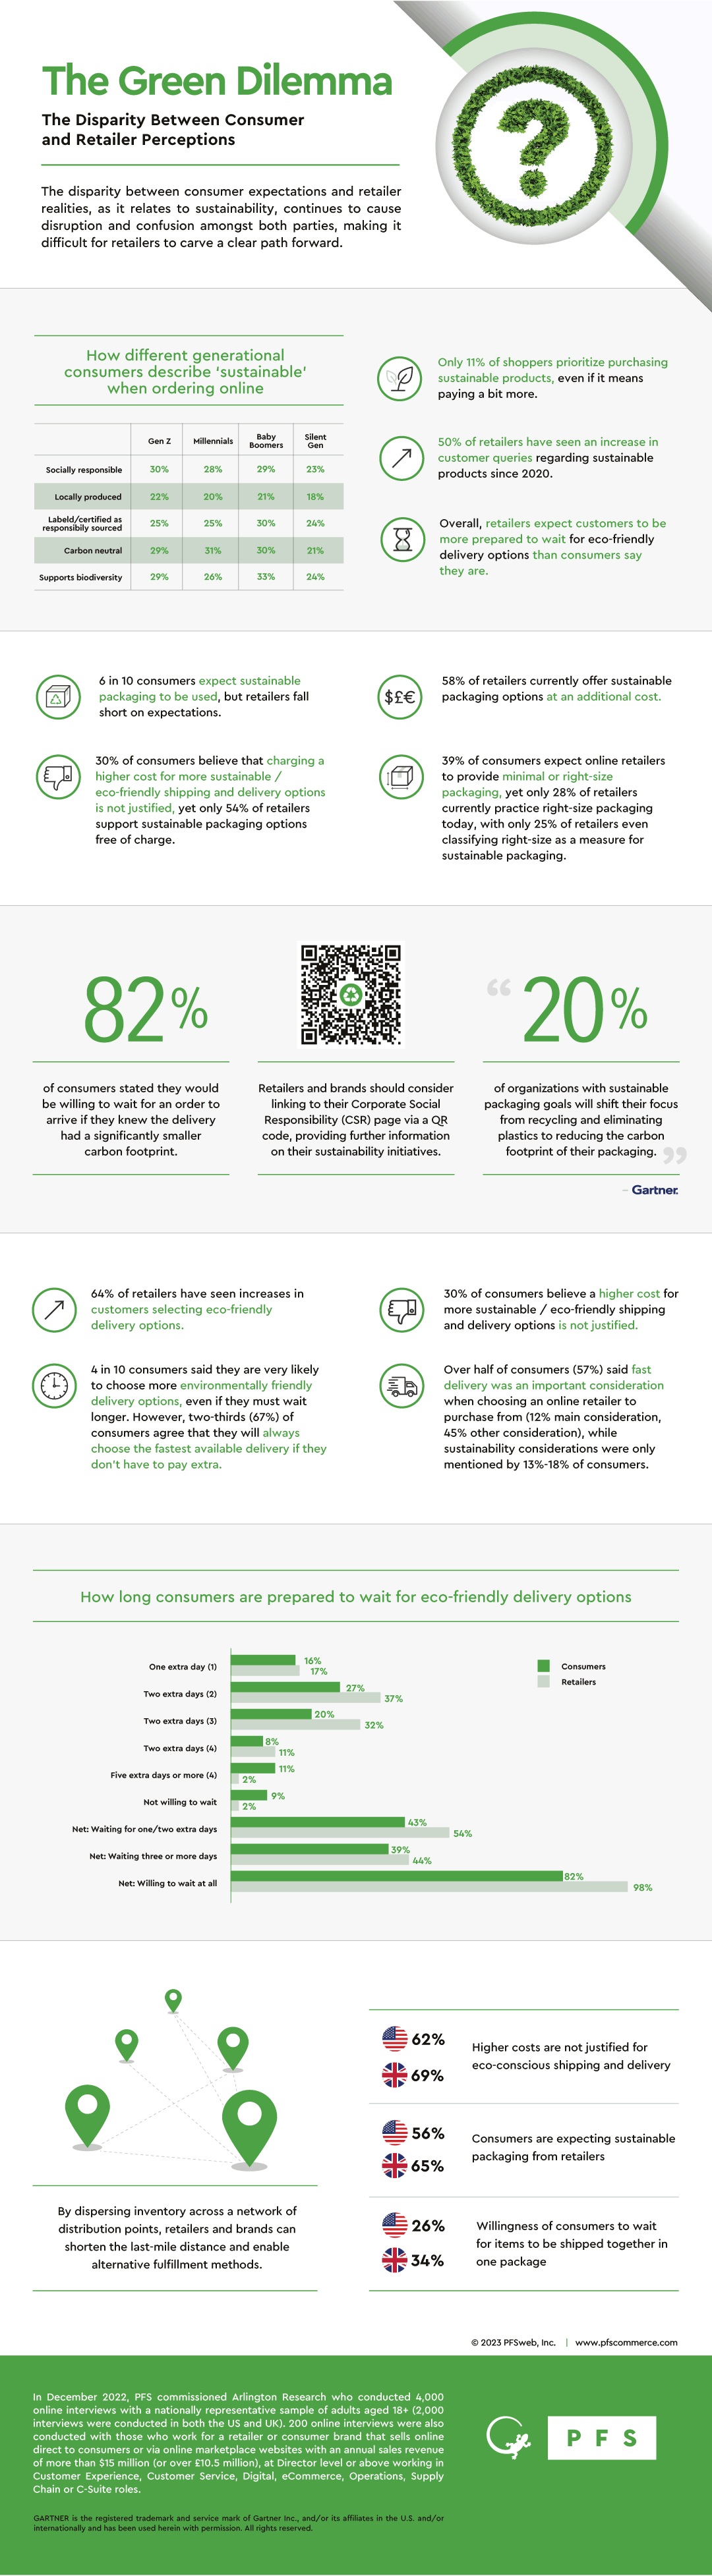 Infographic - The Green Dilemma